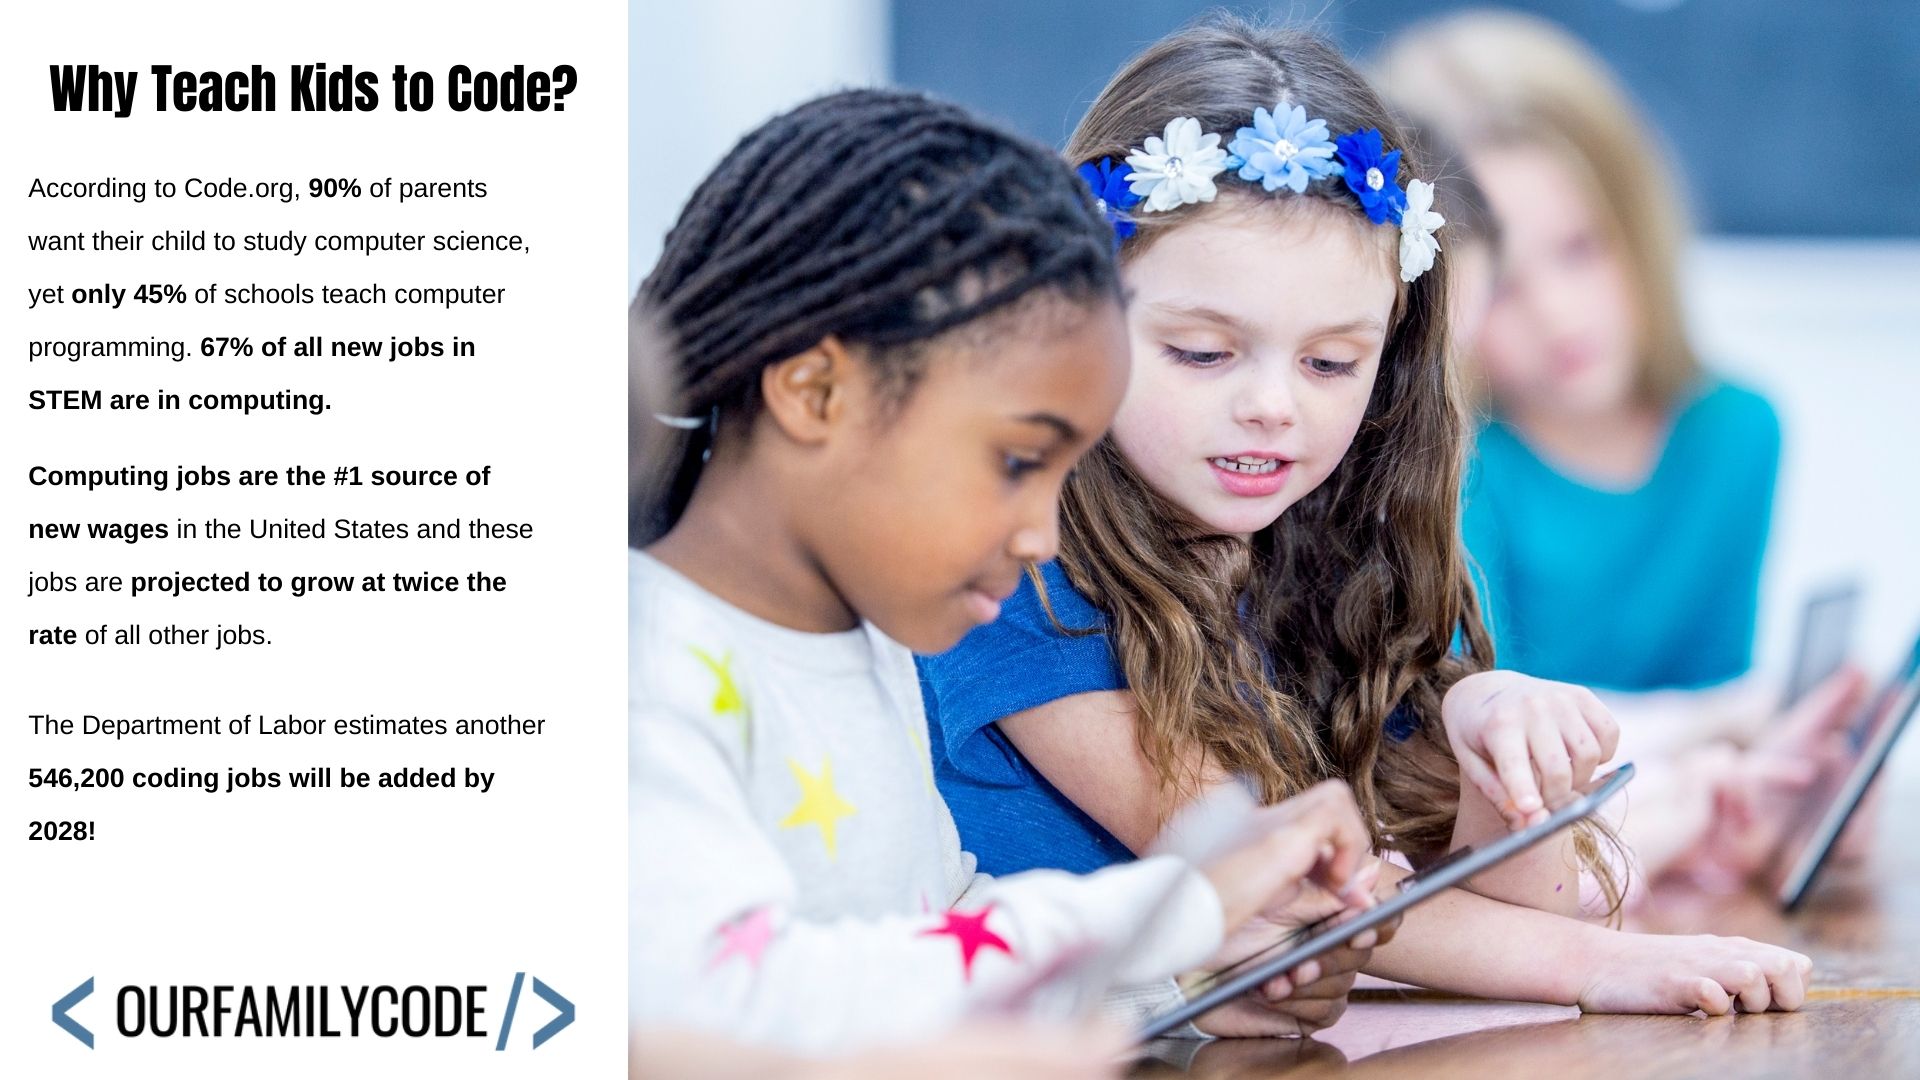 A graphic that includes facts about why kids should learn to code with two girls working on an ipad.